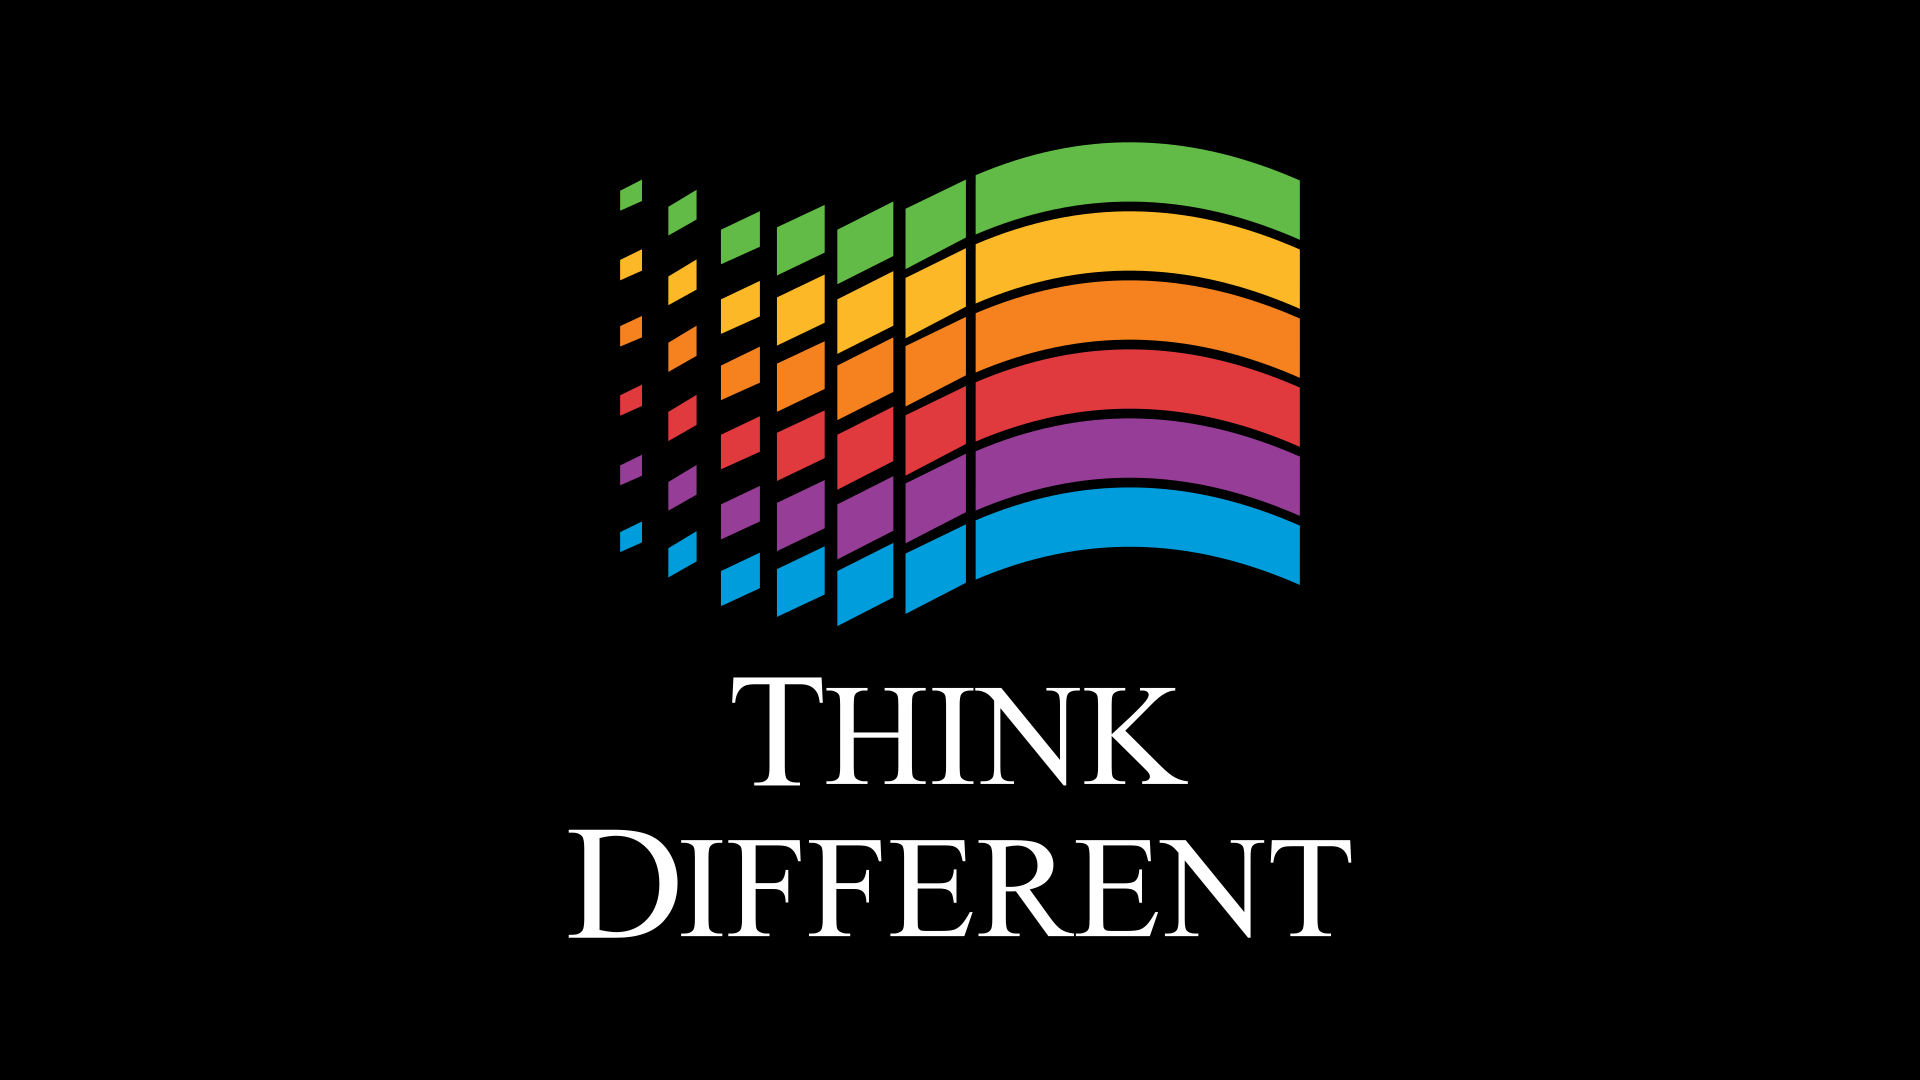 Windows 3.1 Logo - Think different, in the style of Microsoft Windows 3.1's logo ...